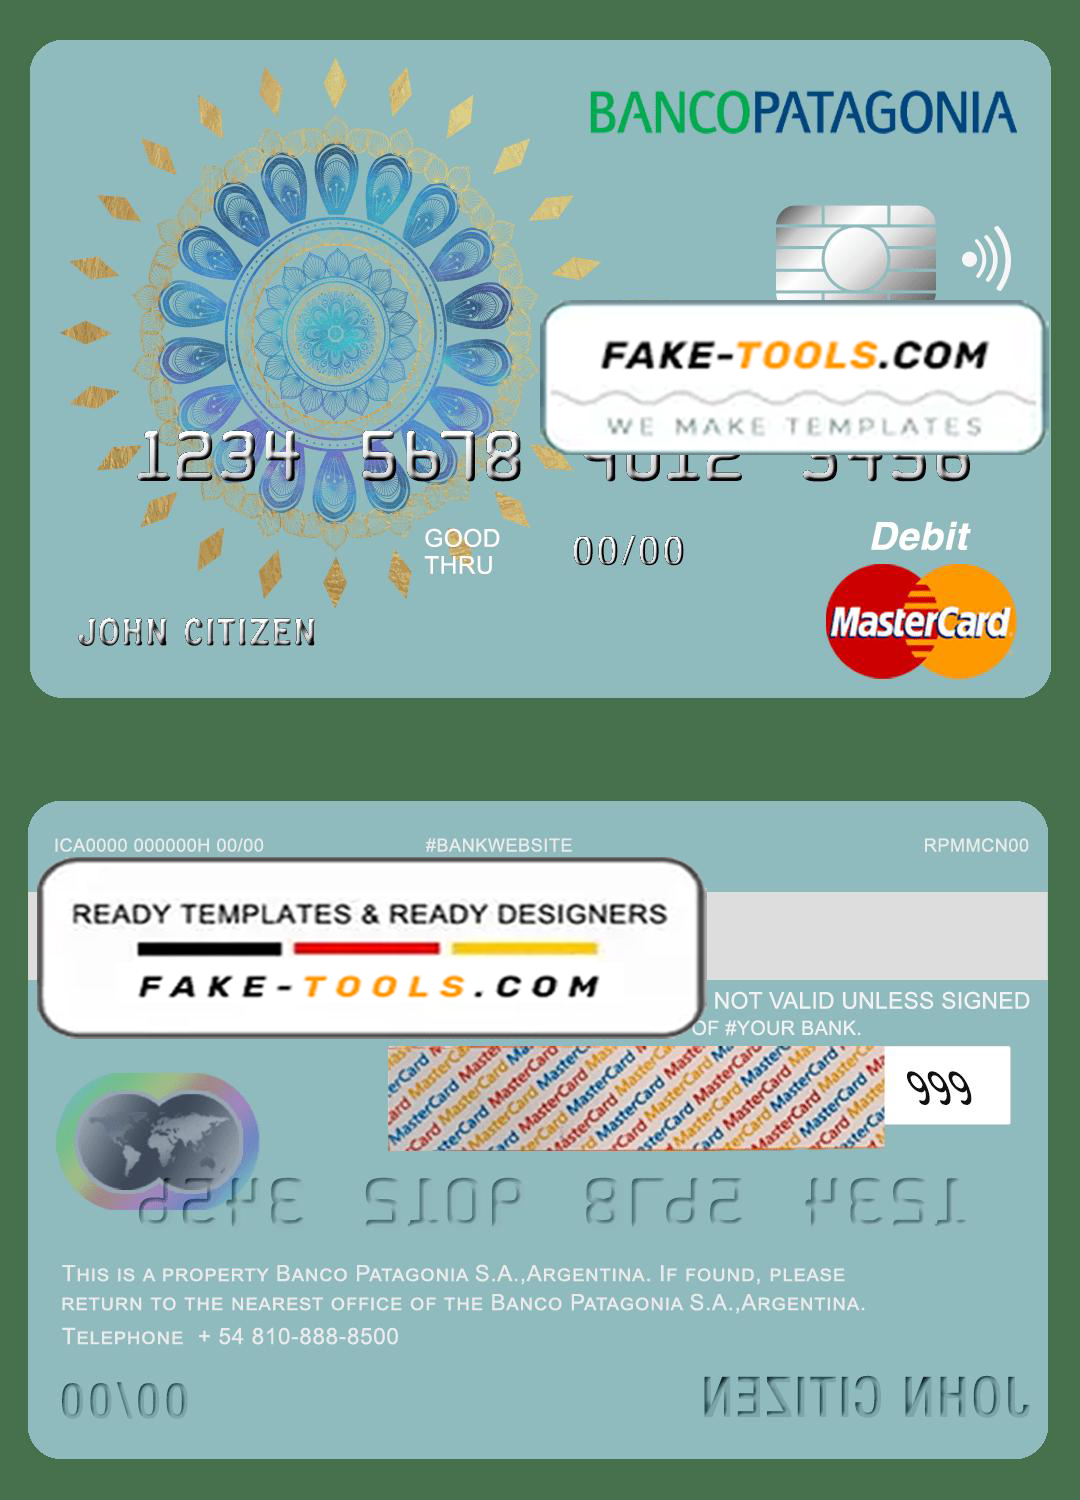 Argentina Banco Patagonia bank mastercard debit card template in PSD format, fully editable